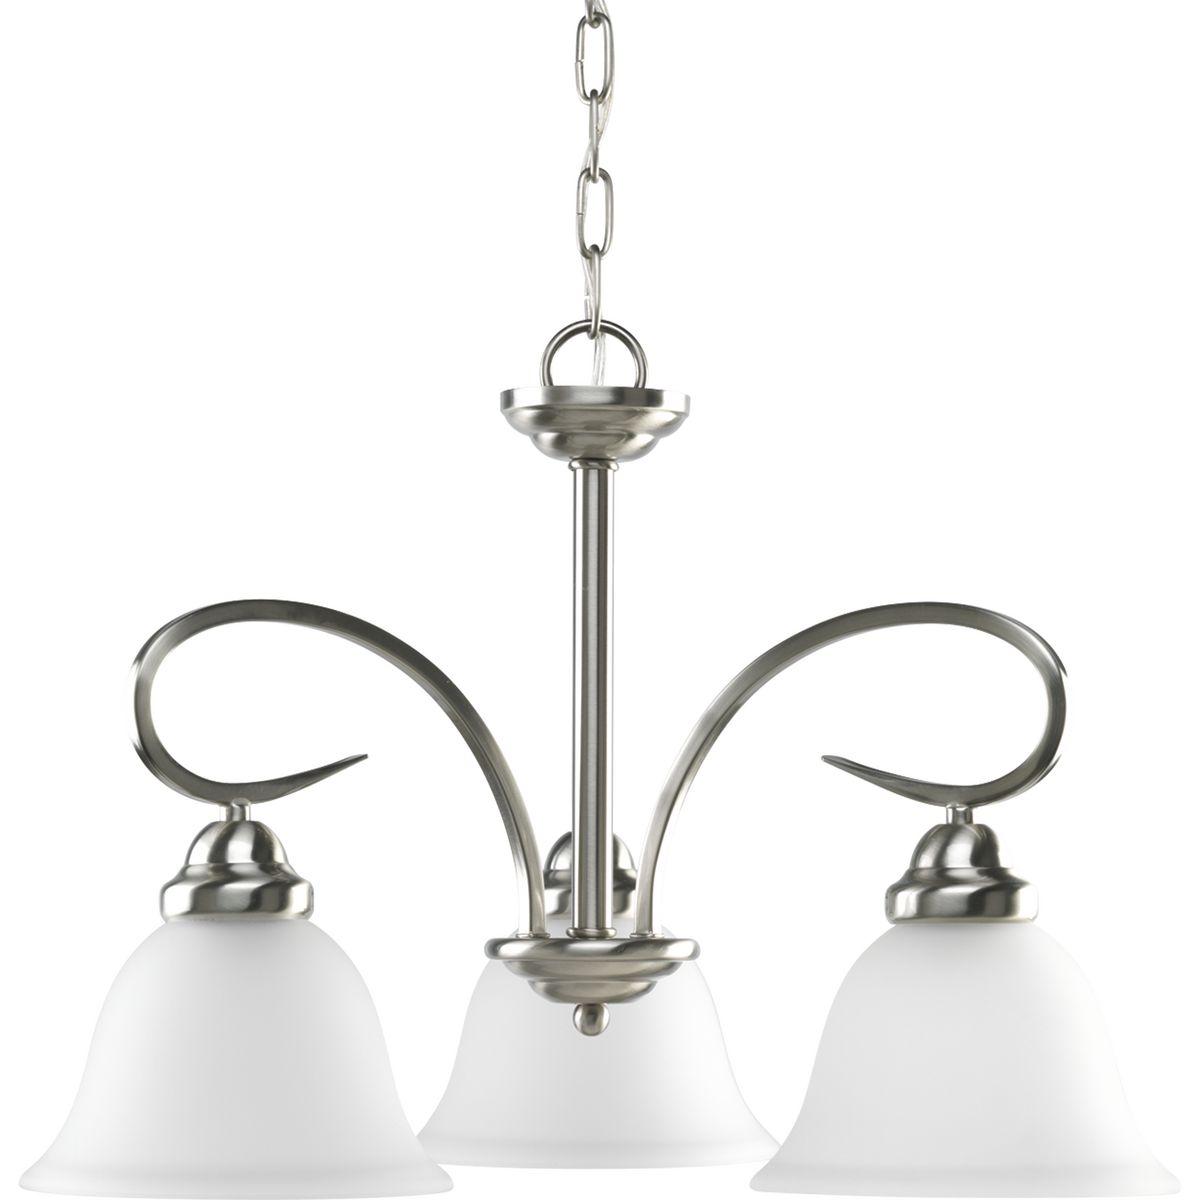 Hubbell HS41002-09 Featuring delicate scrolled metalwork and soft details, this casual three-light chandelier is perfect for many interiors. Slightly tapered etched glass shades are completed by a Brushed Nickel finish. This fixture is hung with the shades facing downwards 